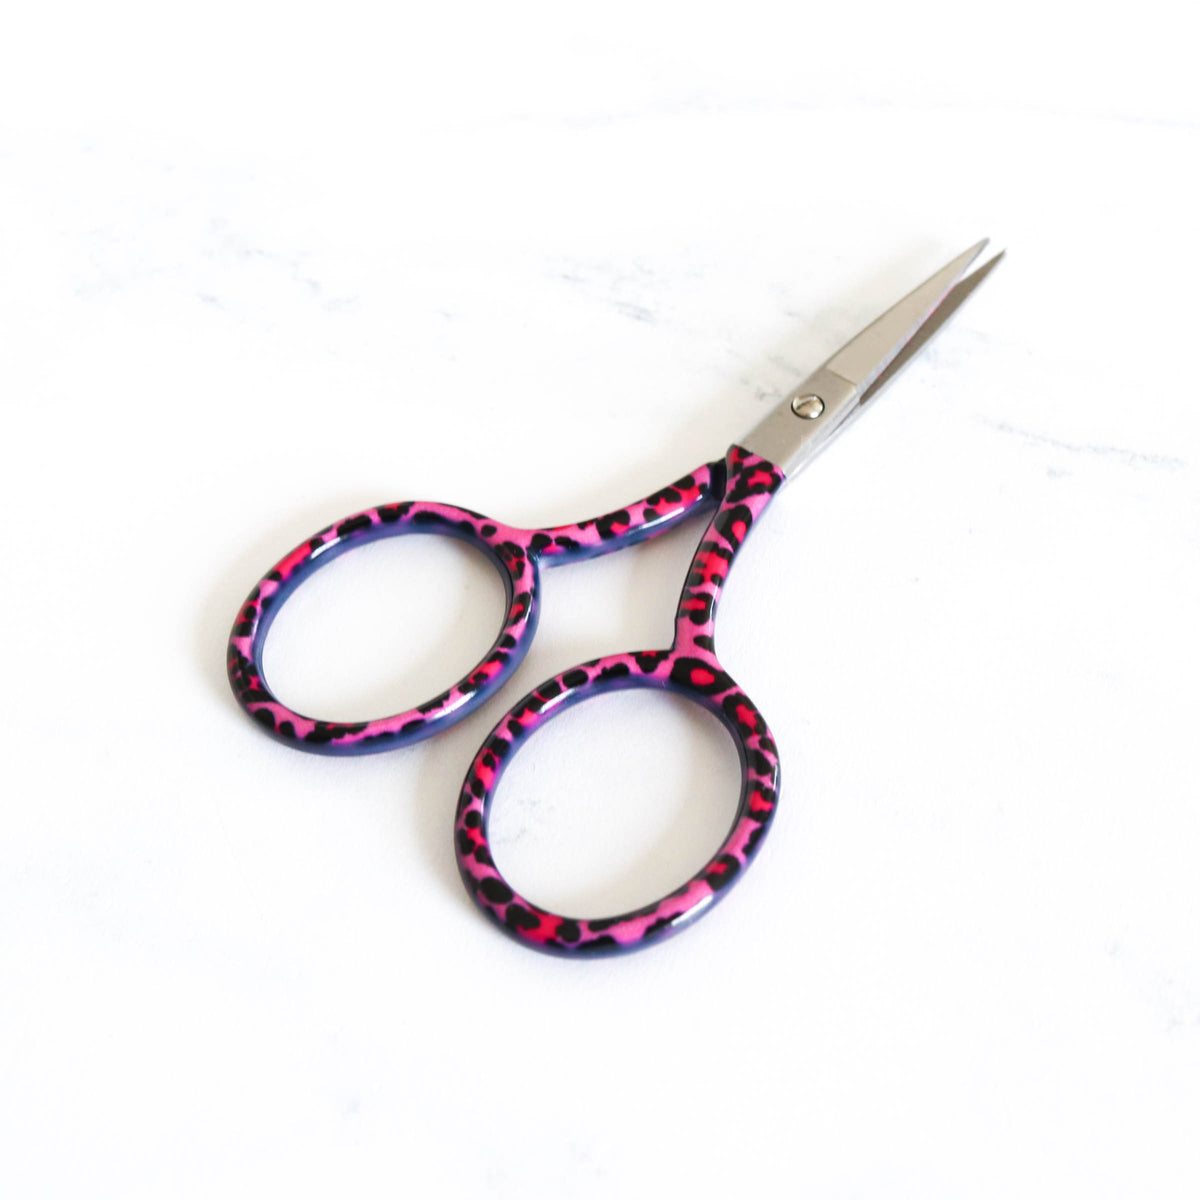 Patterned Embroidery Scissors - Pink Leopard